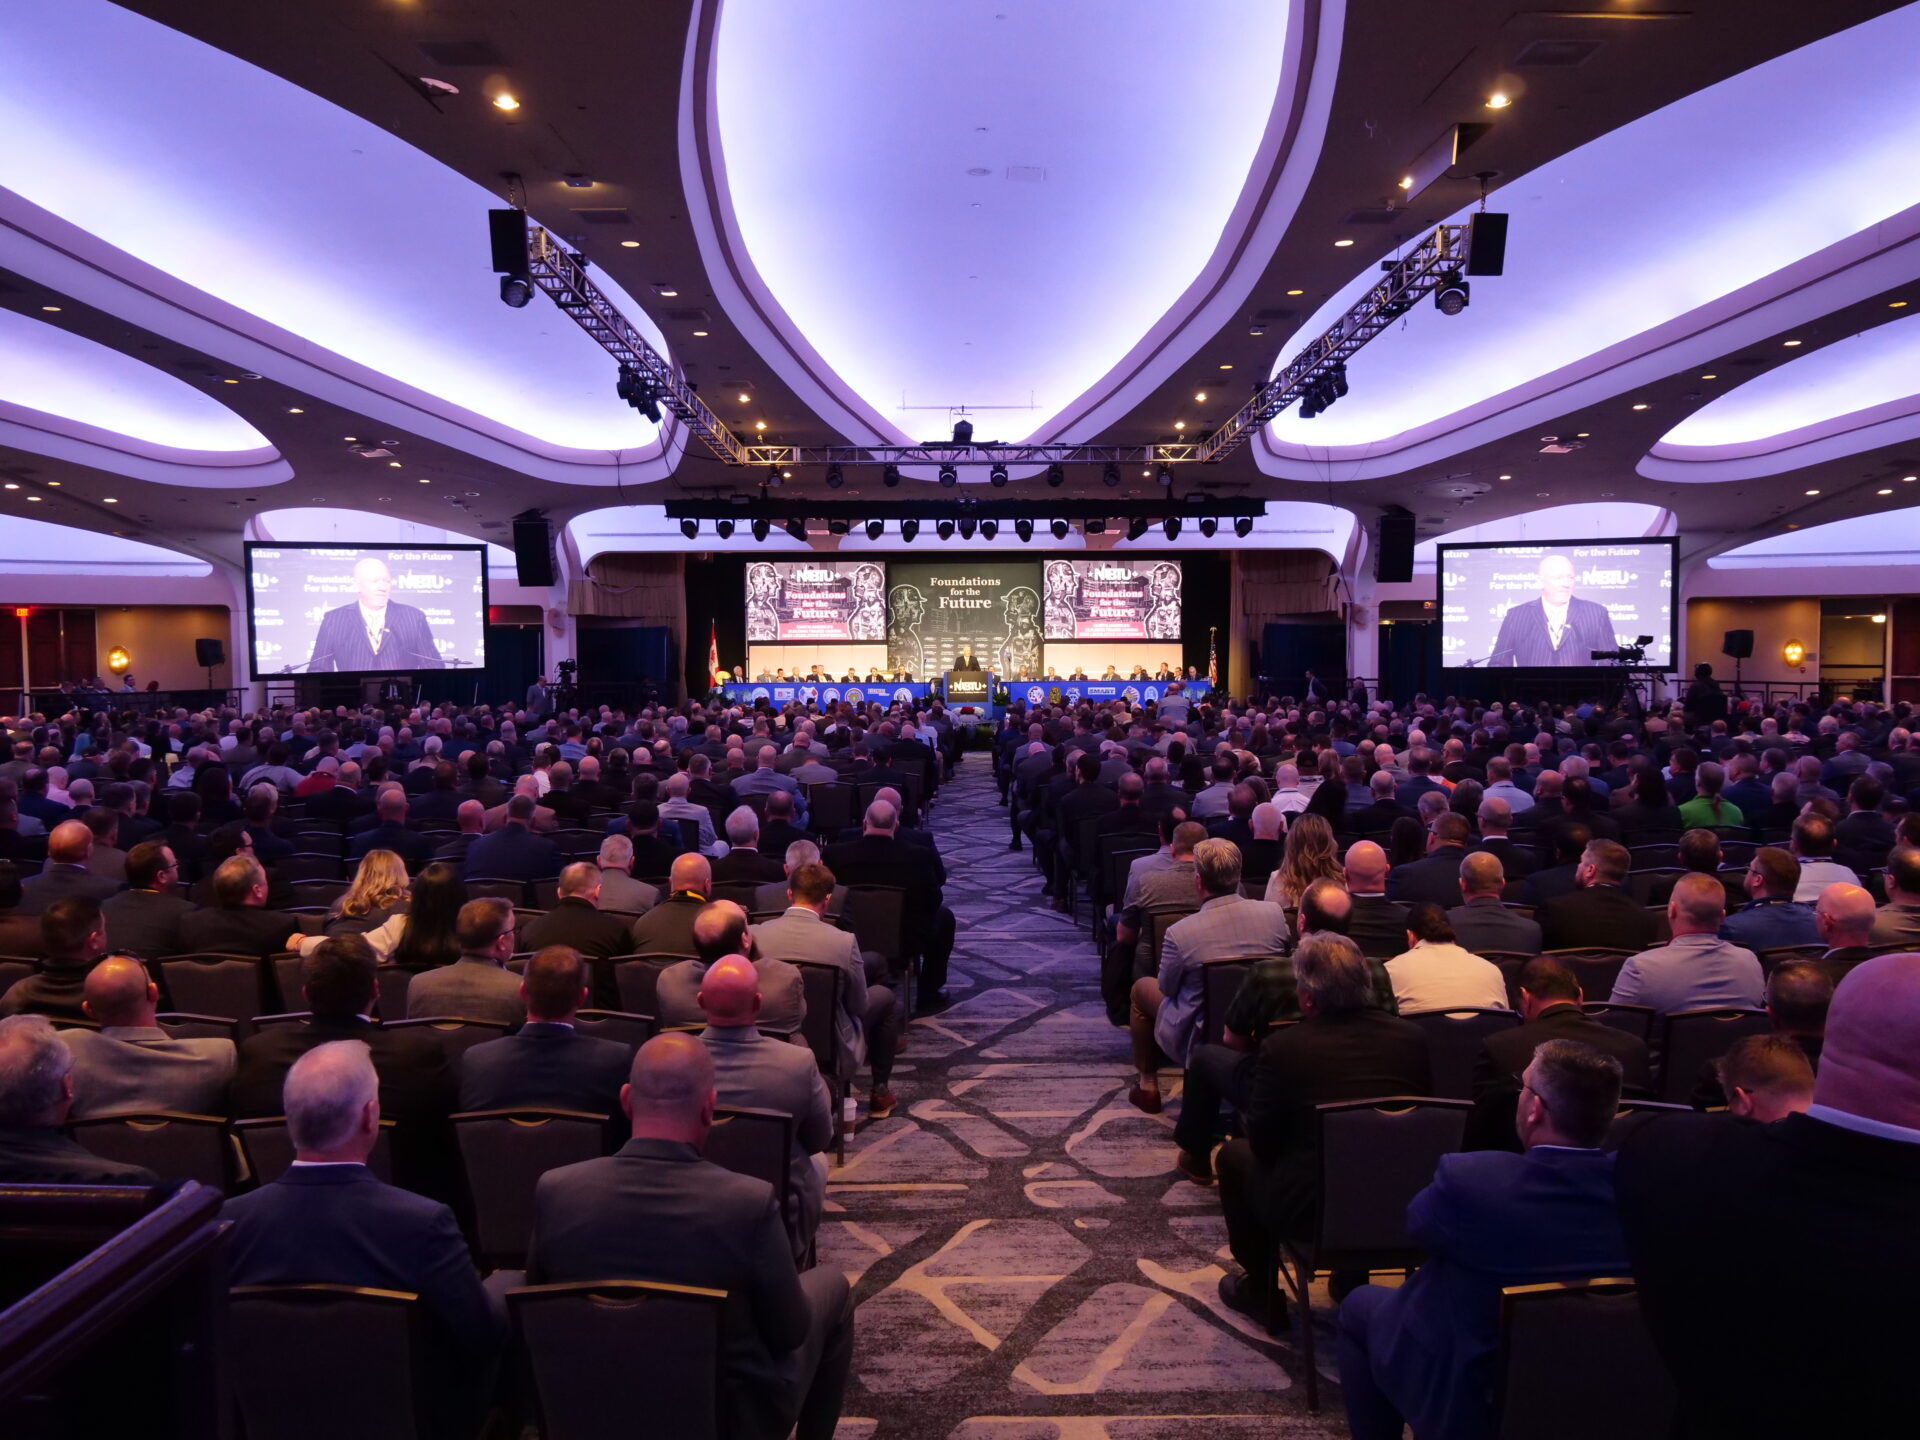 Image from the Gallery: North America’s Building Trades Unions (NABTU) Legislative Conference